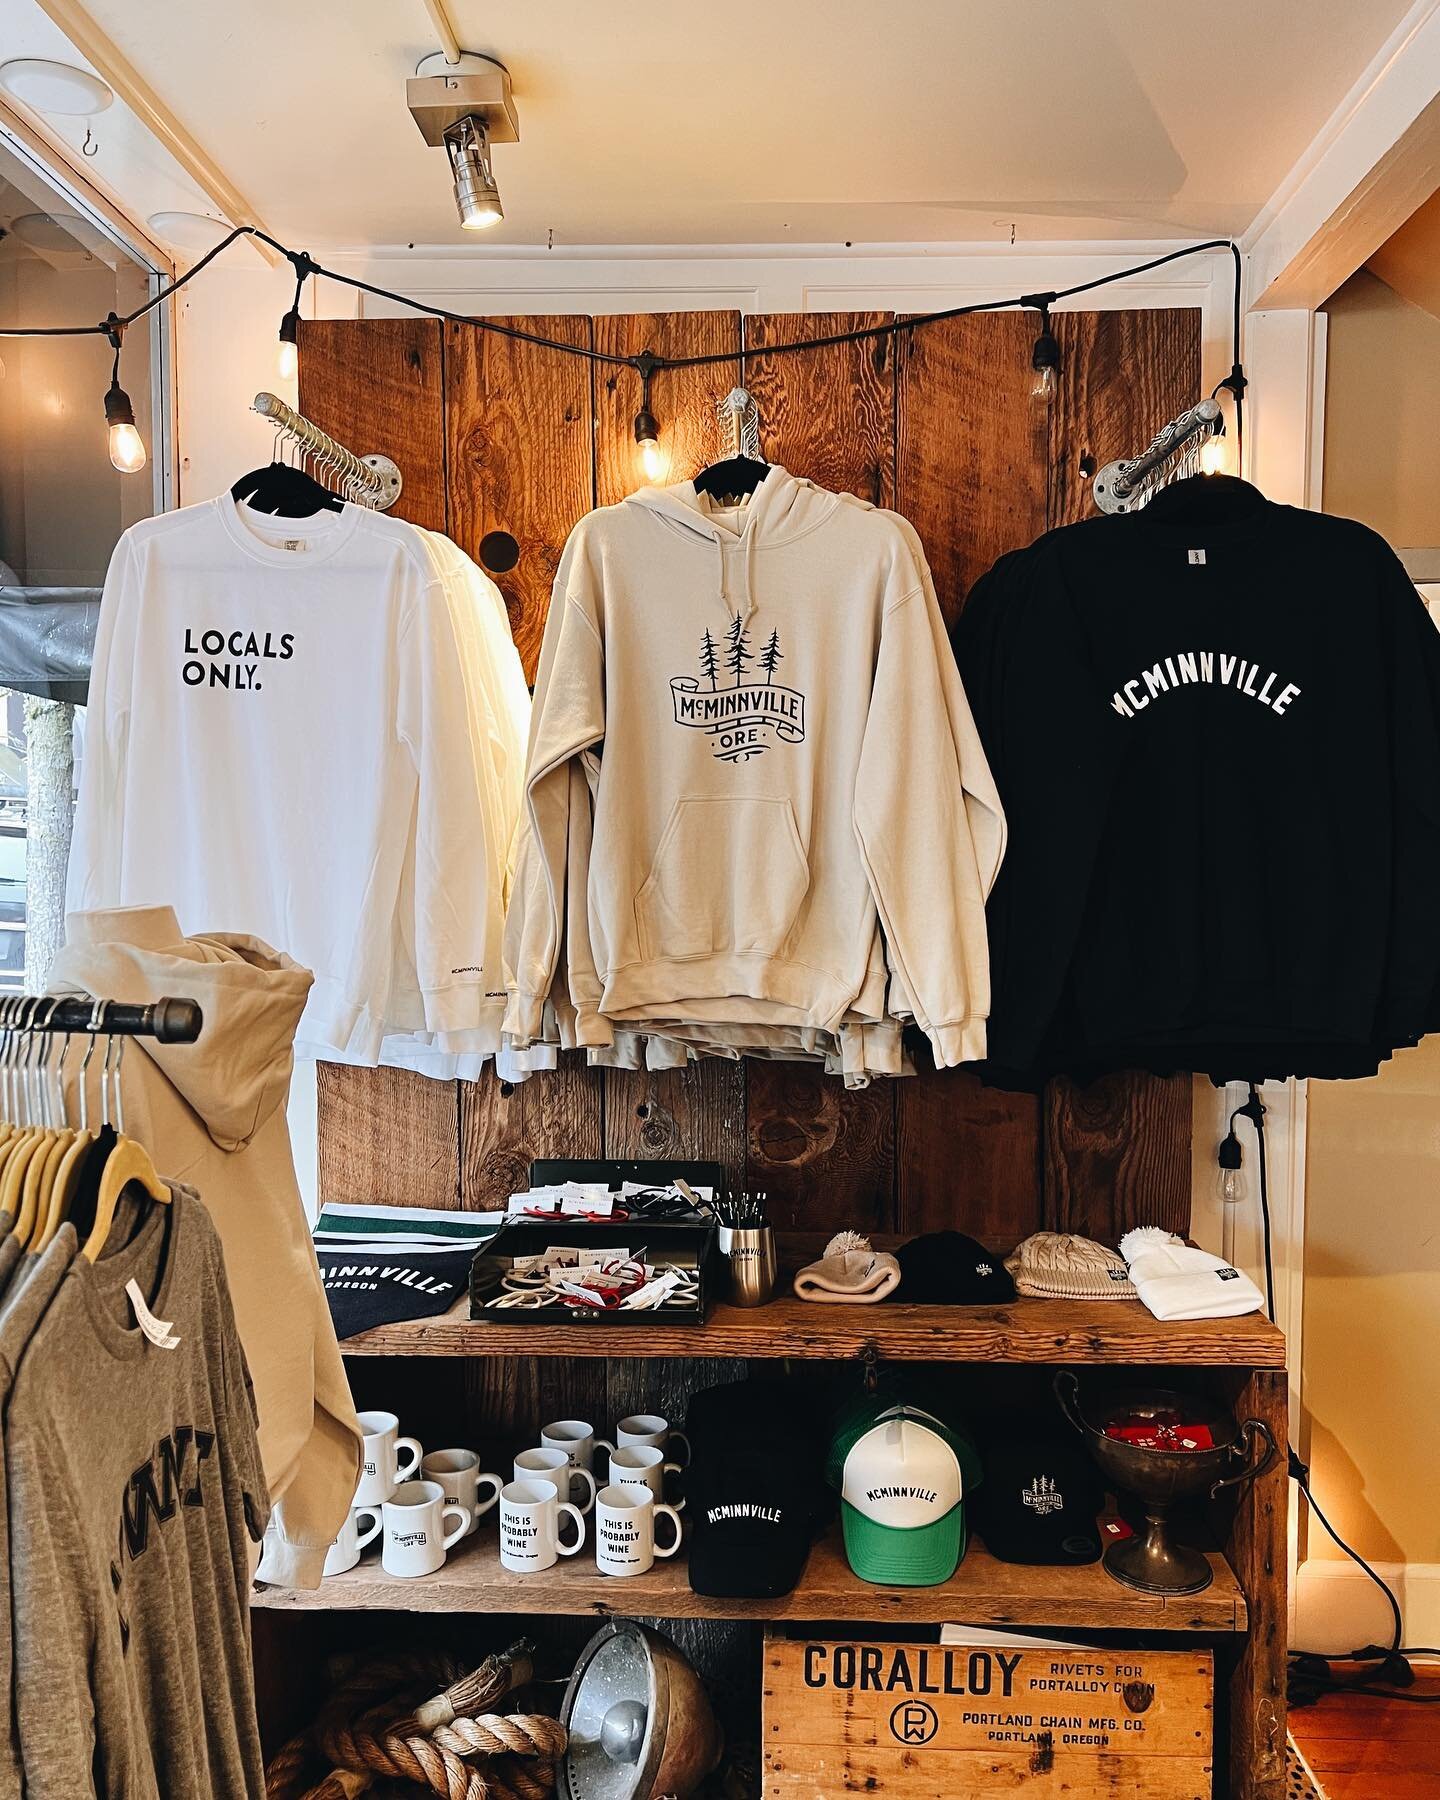 Have you seen what&rsquo;s new at the pop-up? We&rsquo;ve got a ton of sweatshirts and just re-printed a fan favorite&hellip; black crew necks! Plus we&rsquo;ve a ton of tshirts from our &ldquo;Locals Only&rdquo; line, and working on getting more swe